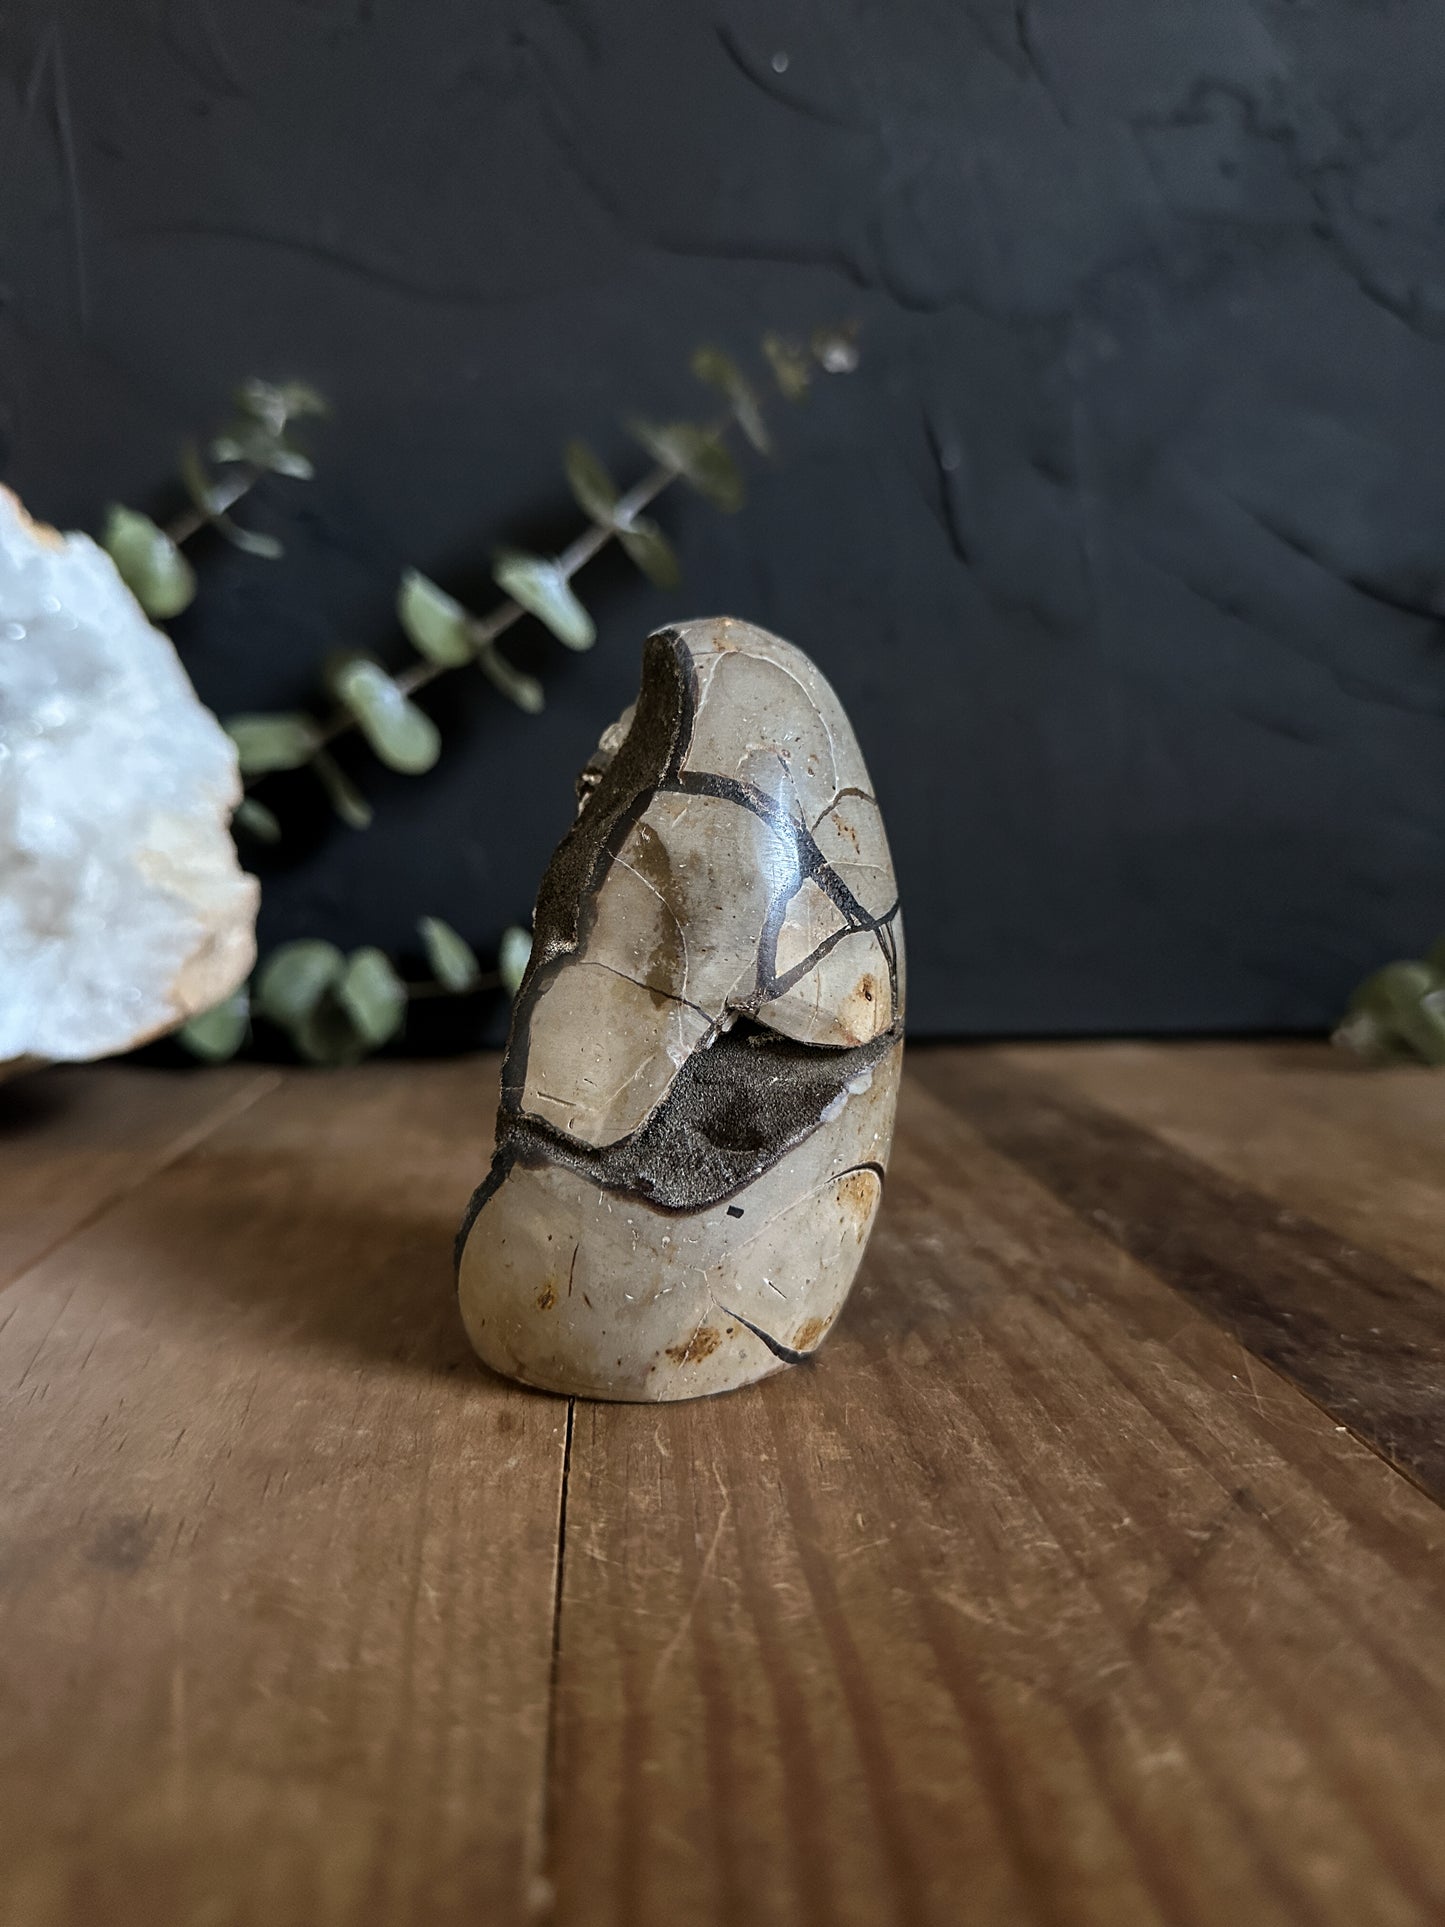 Septarian Geode with Calcite Inclusions - 01